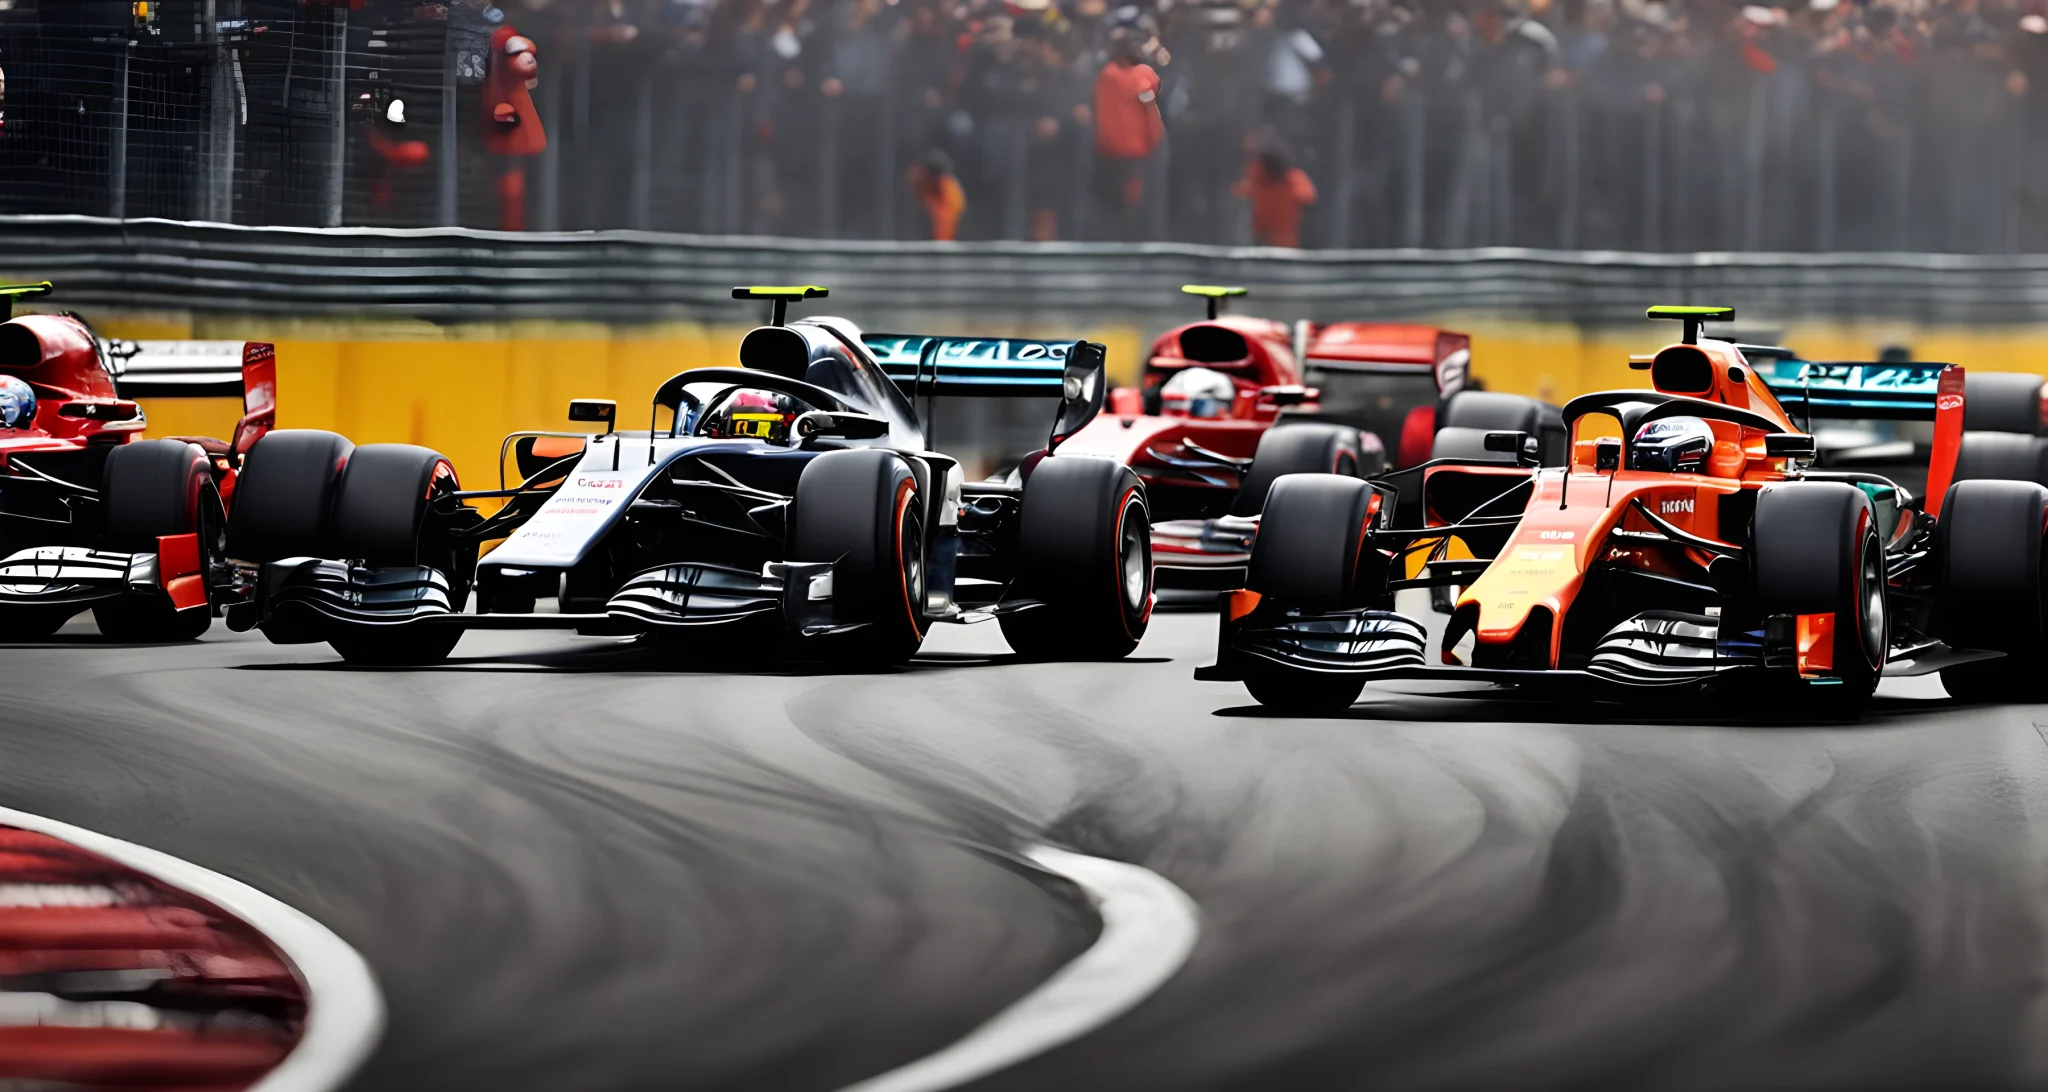 The image shows Formula One cars racing on a track, with teams and drivers in their colorful racing gear.